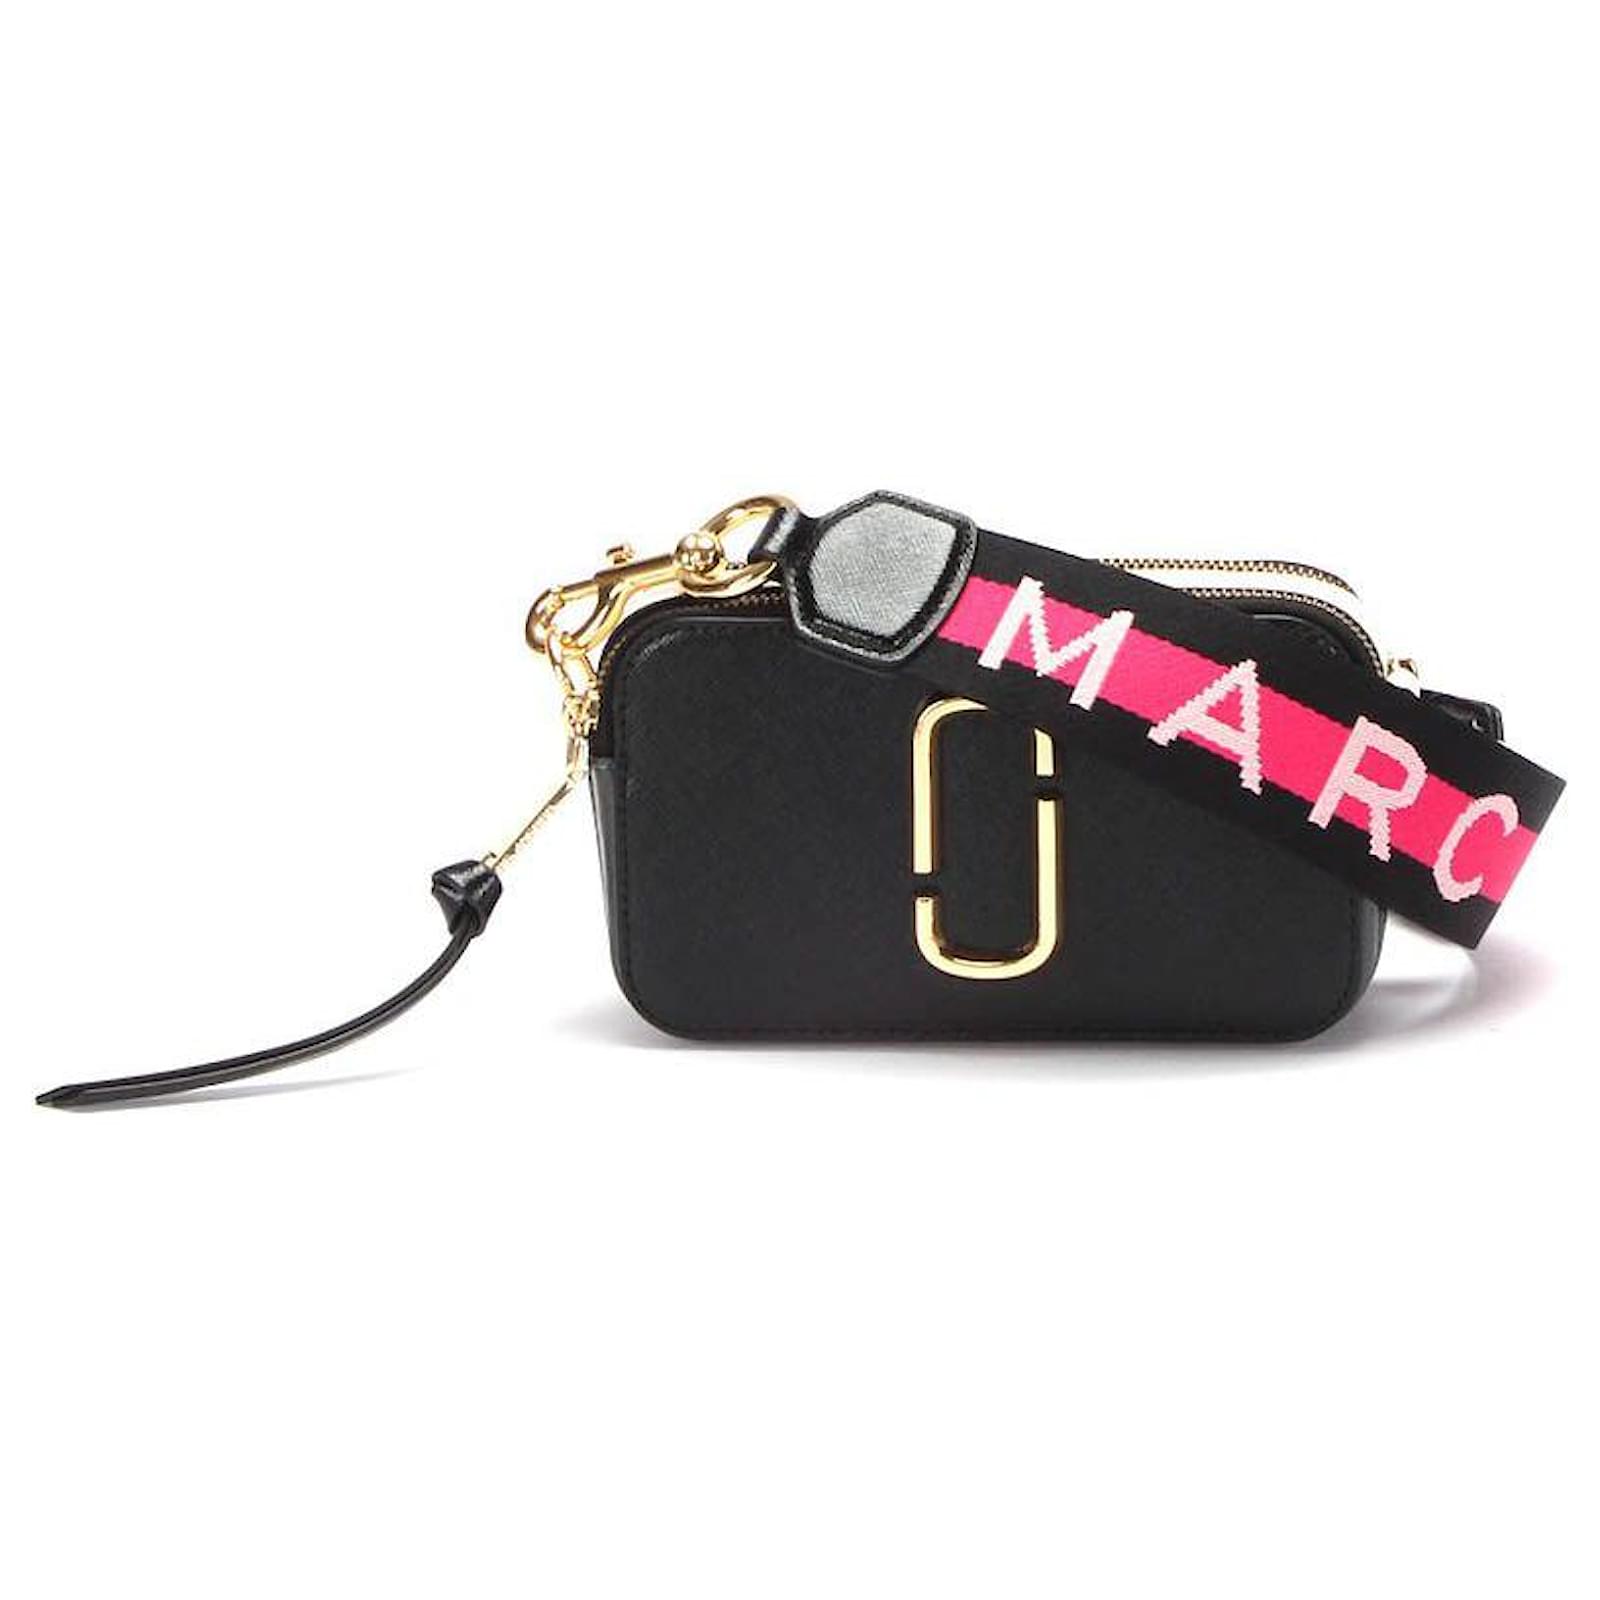 MARC JACOBS SNAPSHOT BAG IN BLACK LEATHER